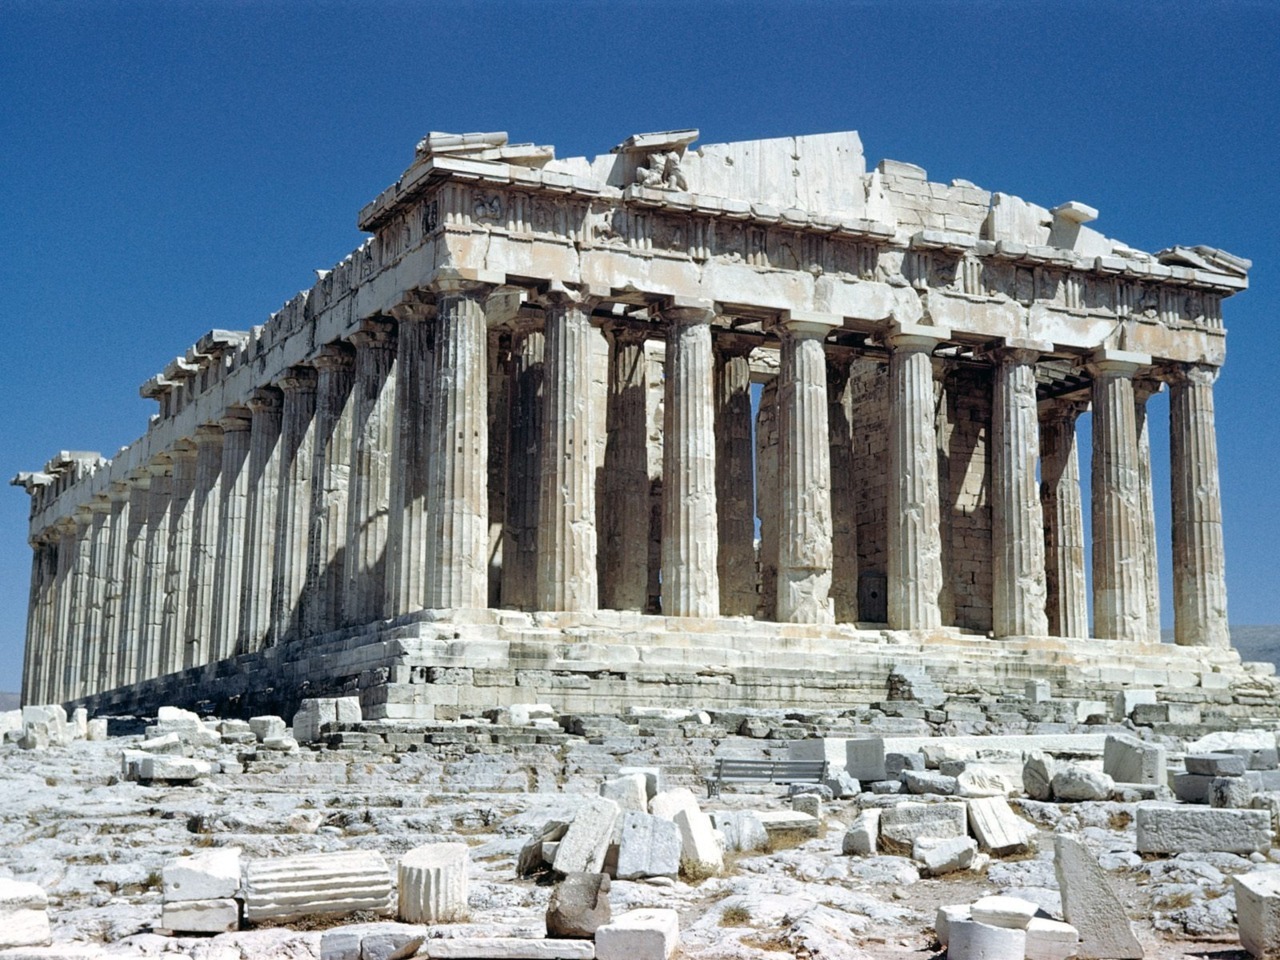 <p>-Diagram of 9:4 ratio -Overall length to overall width -Temple front width to its height -Distance between the columns -Curves in the Parthenon -The end of the stylobate are 12 cm lower than in the center; -The curvature is also in the entablature; -The tops of the columns lean in by 7cm; -The corner columns are slightly thicker</p>